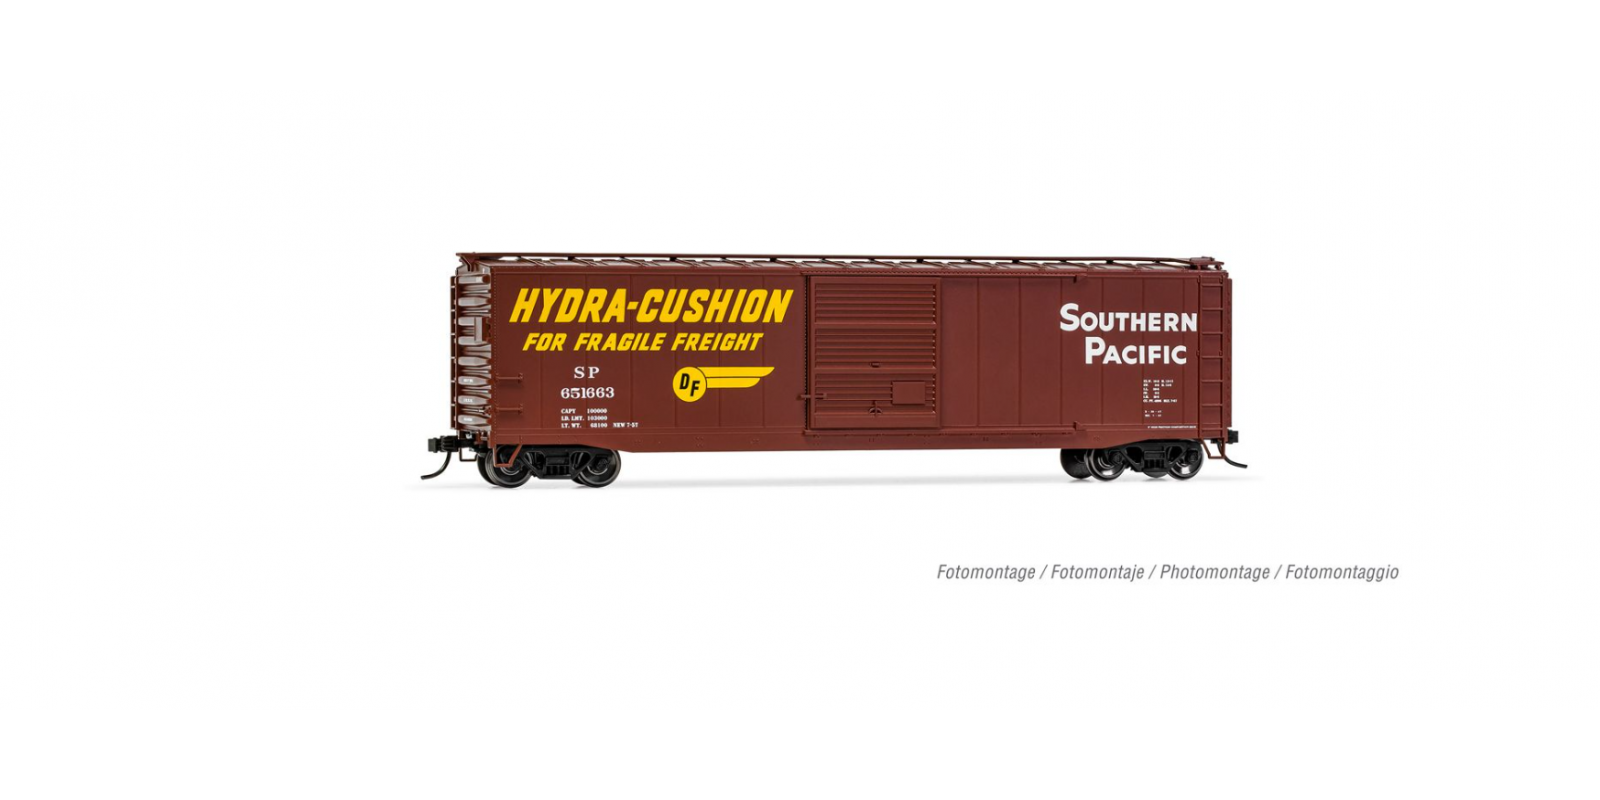 RI6585C Southern Pacific, Box Car, running number #3